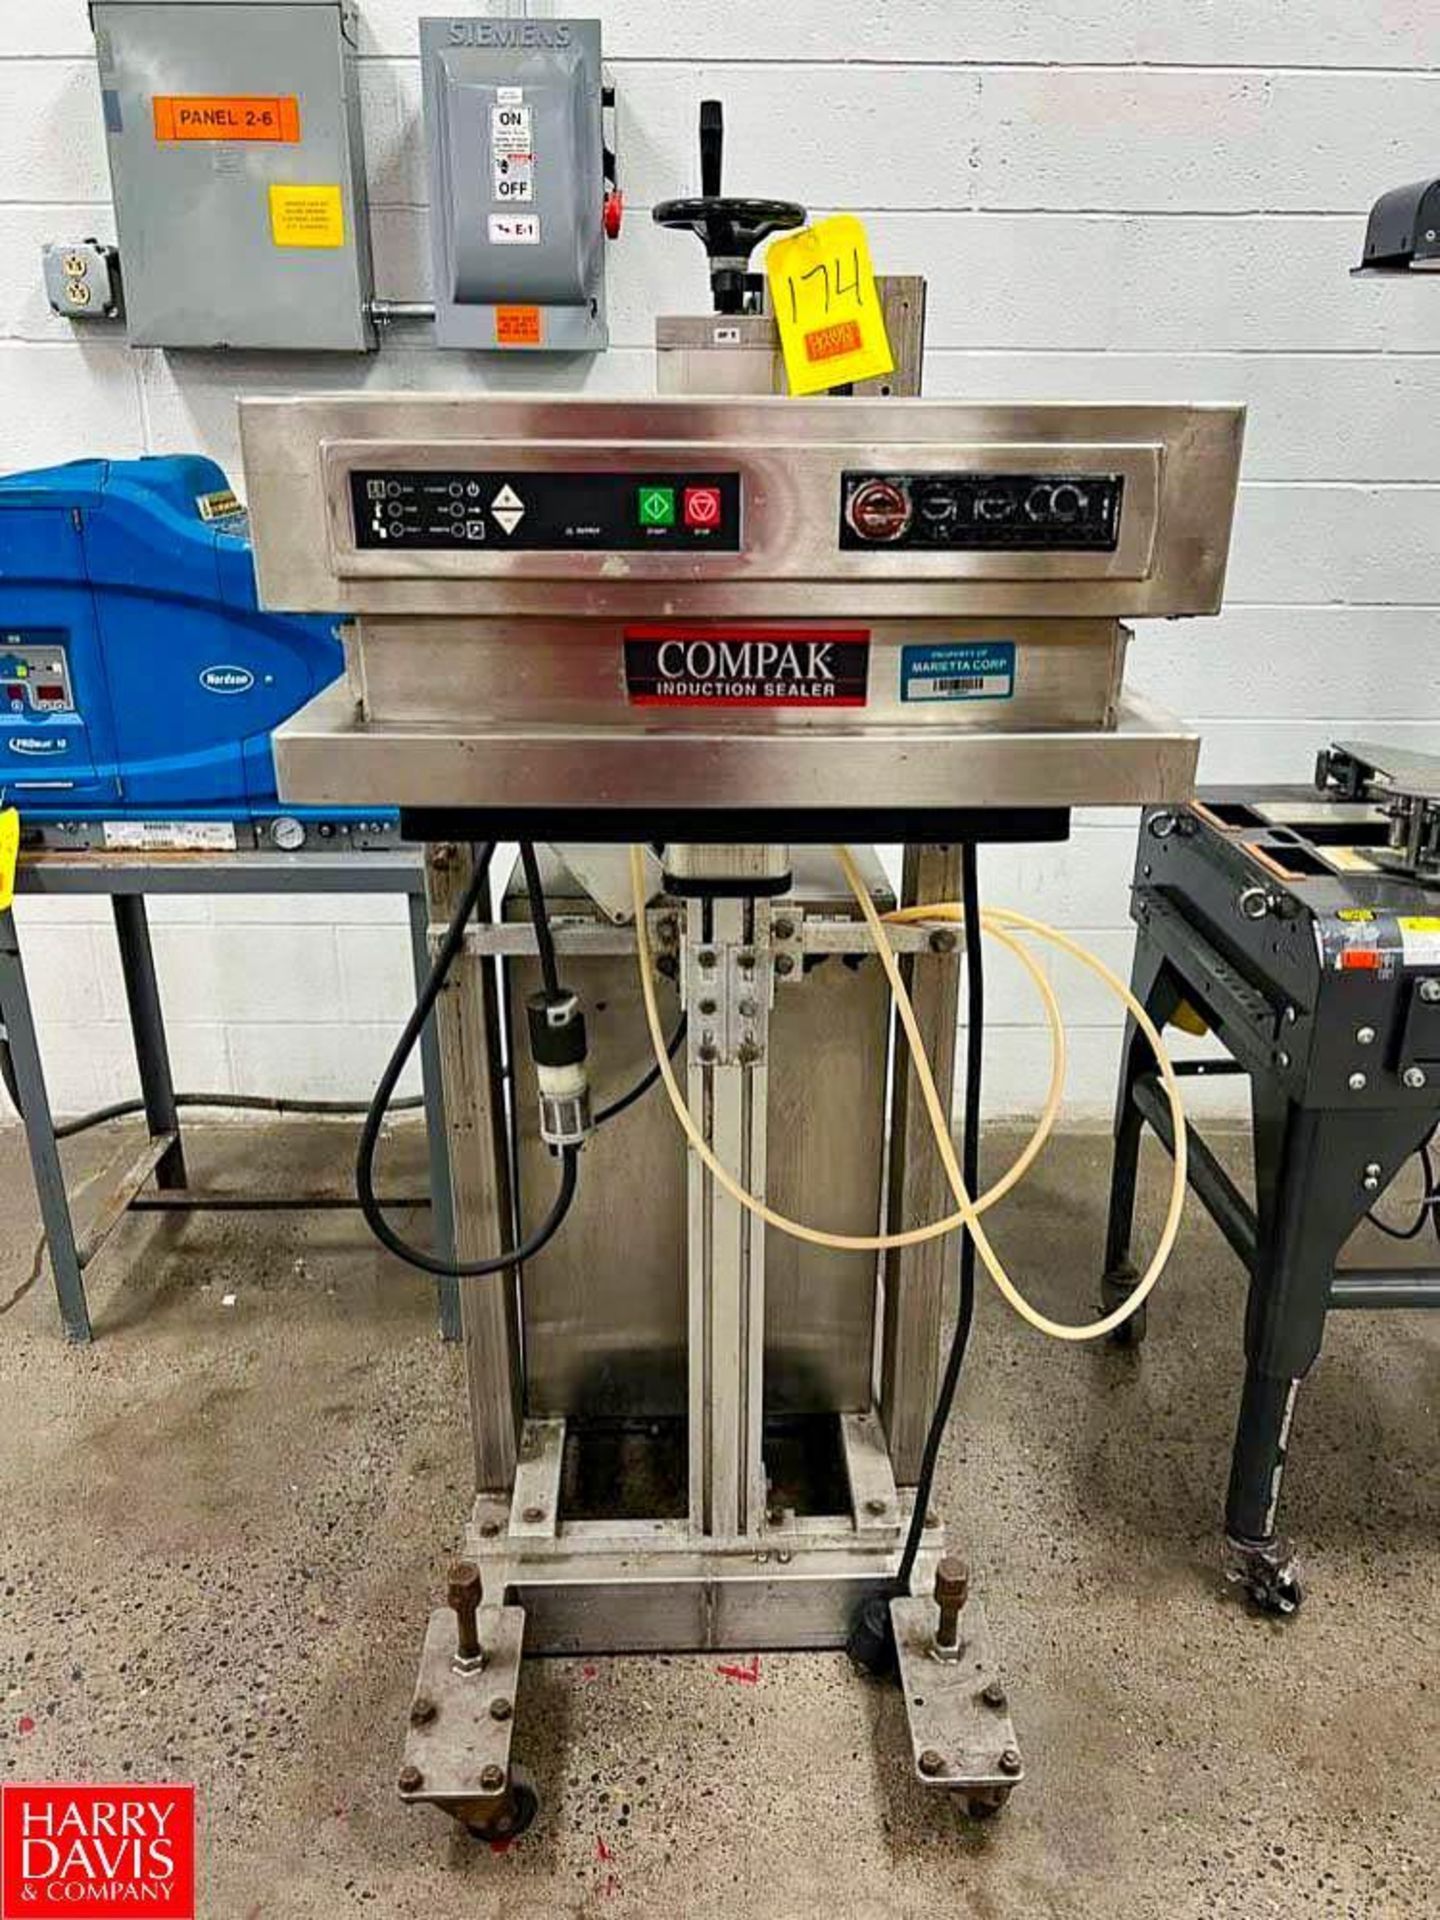 Compak Mobile S/S Induction Sealer with Enercon Heater - Rigging Fee: $150